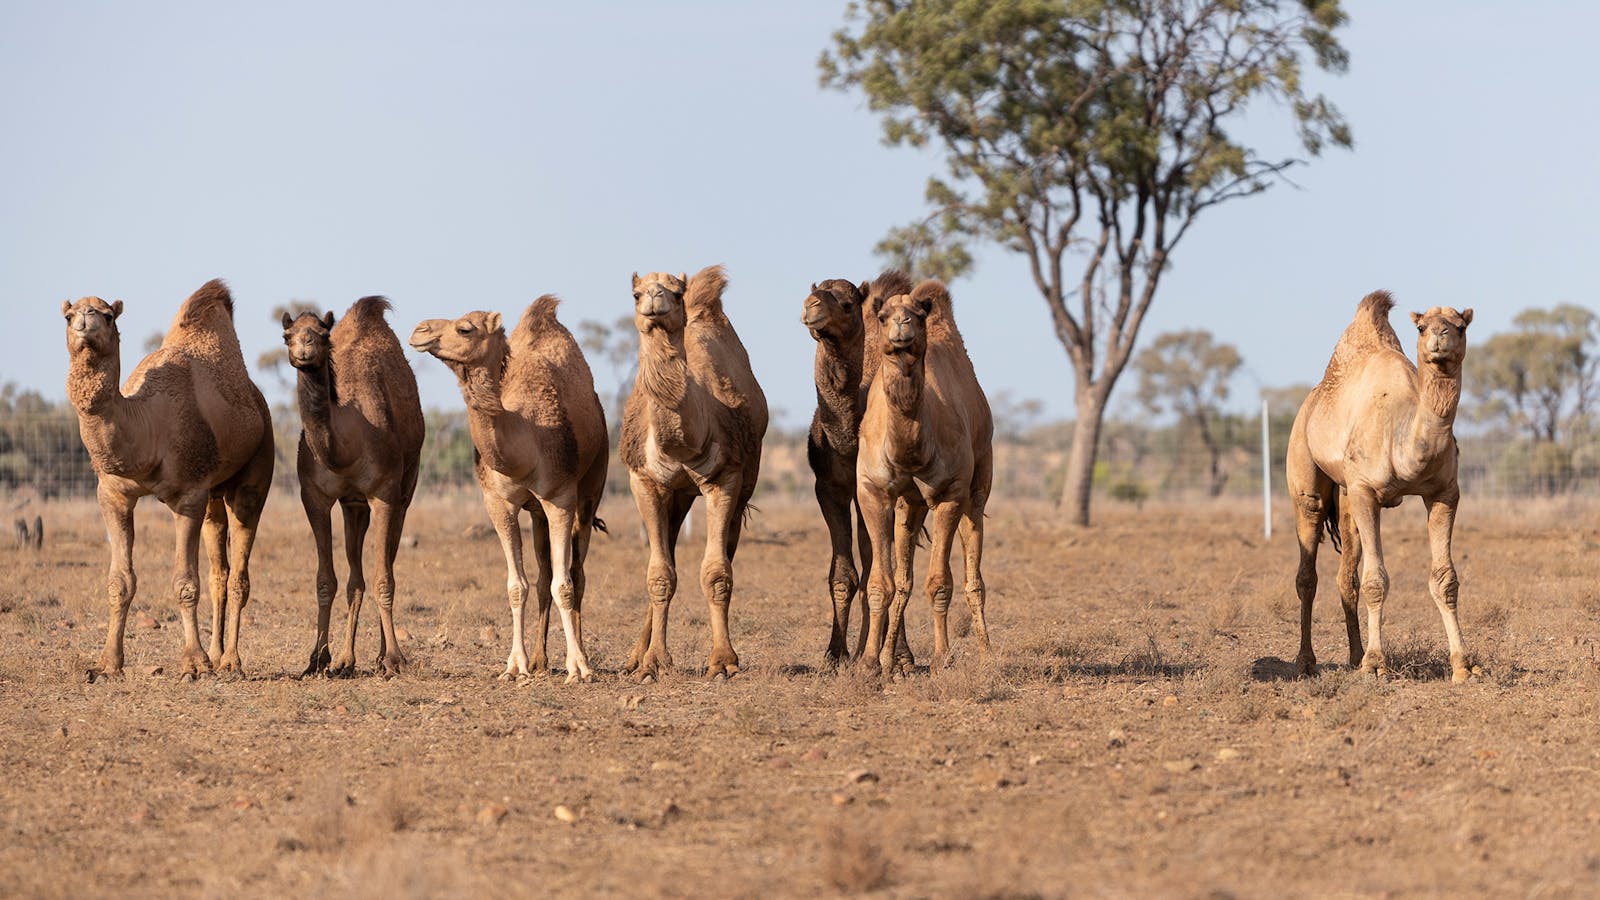 Look out for the Afghan camels roaming the station property